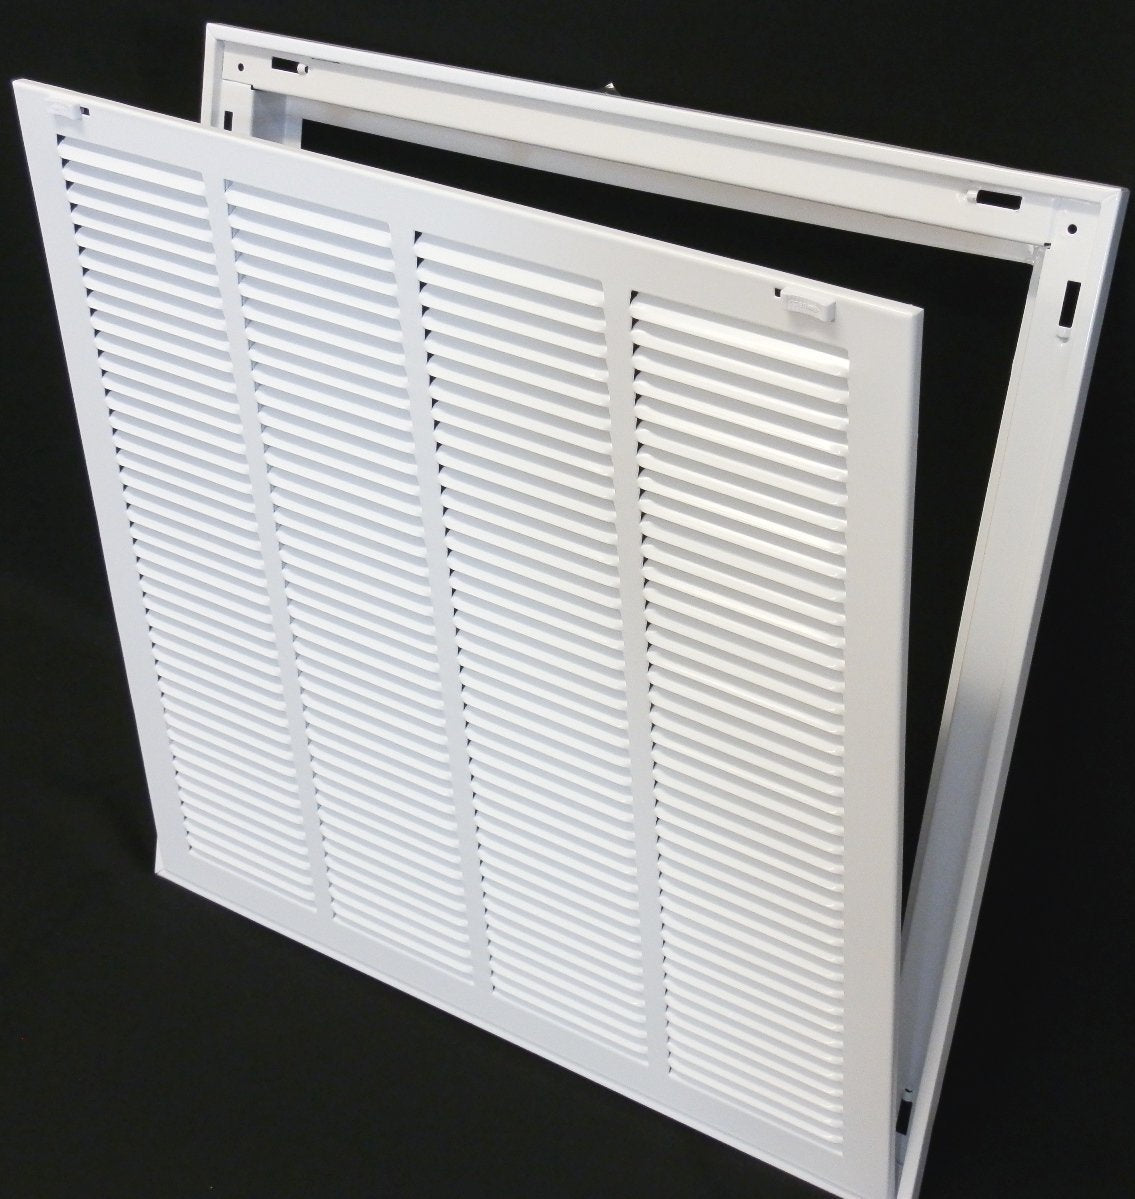 34&quot; X 28&quot; Steel Return Air Filter Grille for 1&quot; Filter - Removable Frame - [Outer Dimensions: 36 5/8&quot; X 30 5/8&quot;]